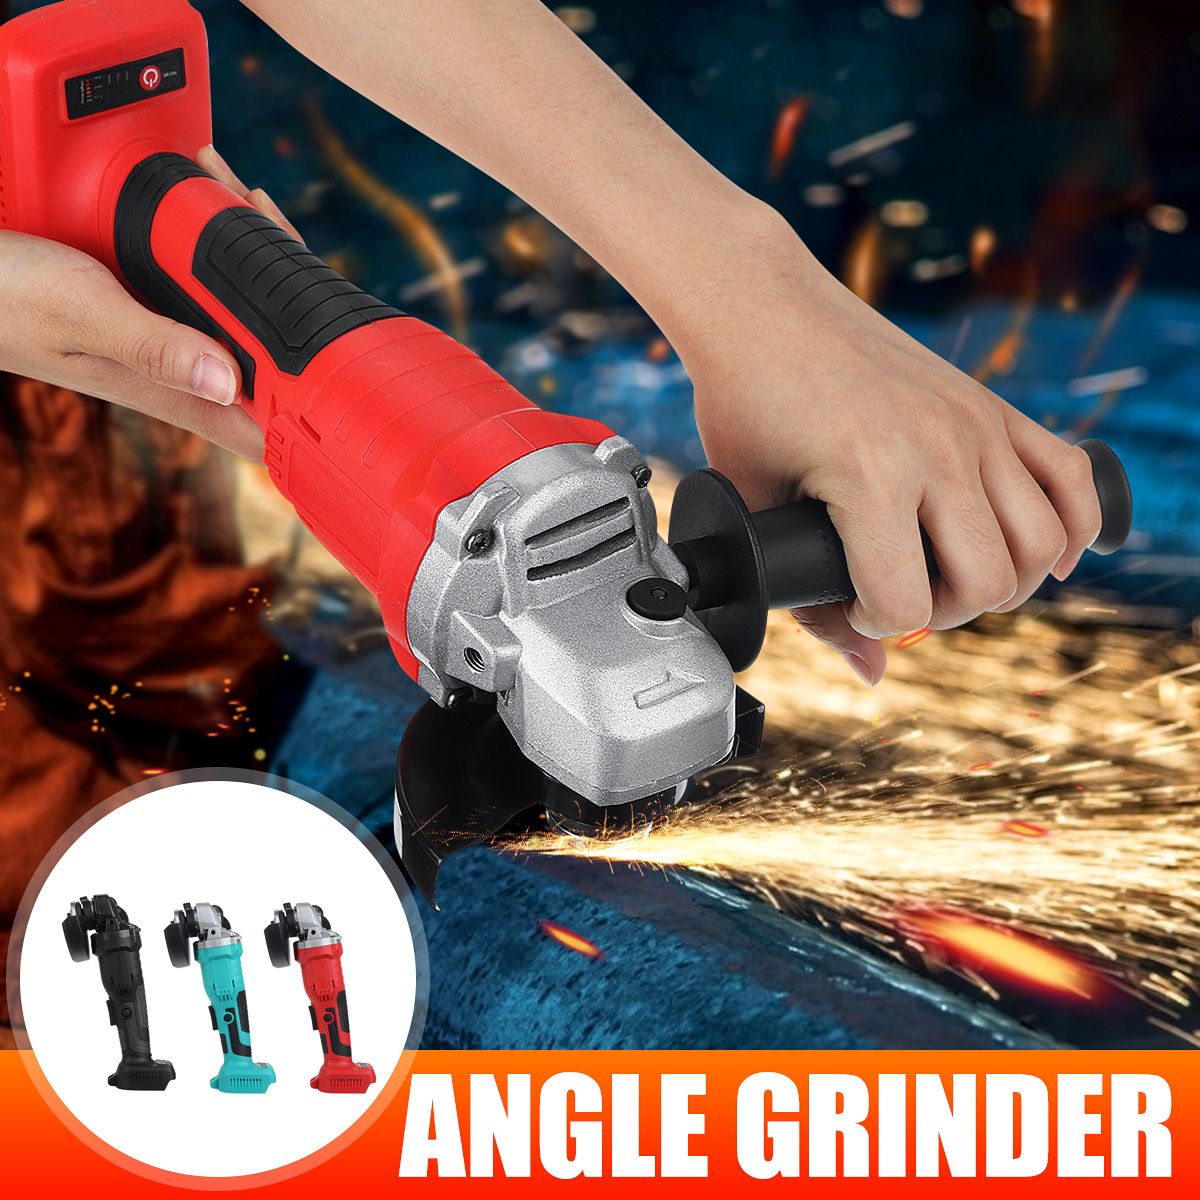 125mm-Cordless-Electric-Angle-Grinder-Cutting-Machine-Polisher-DIY-Power-Tool-1743685